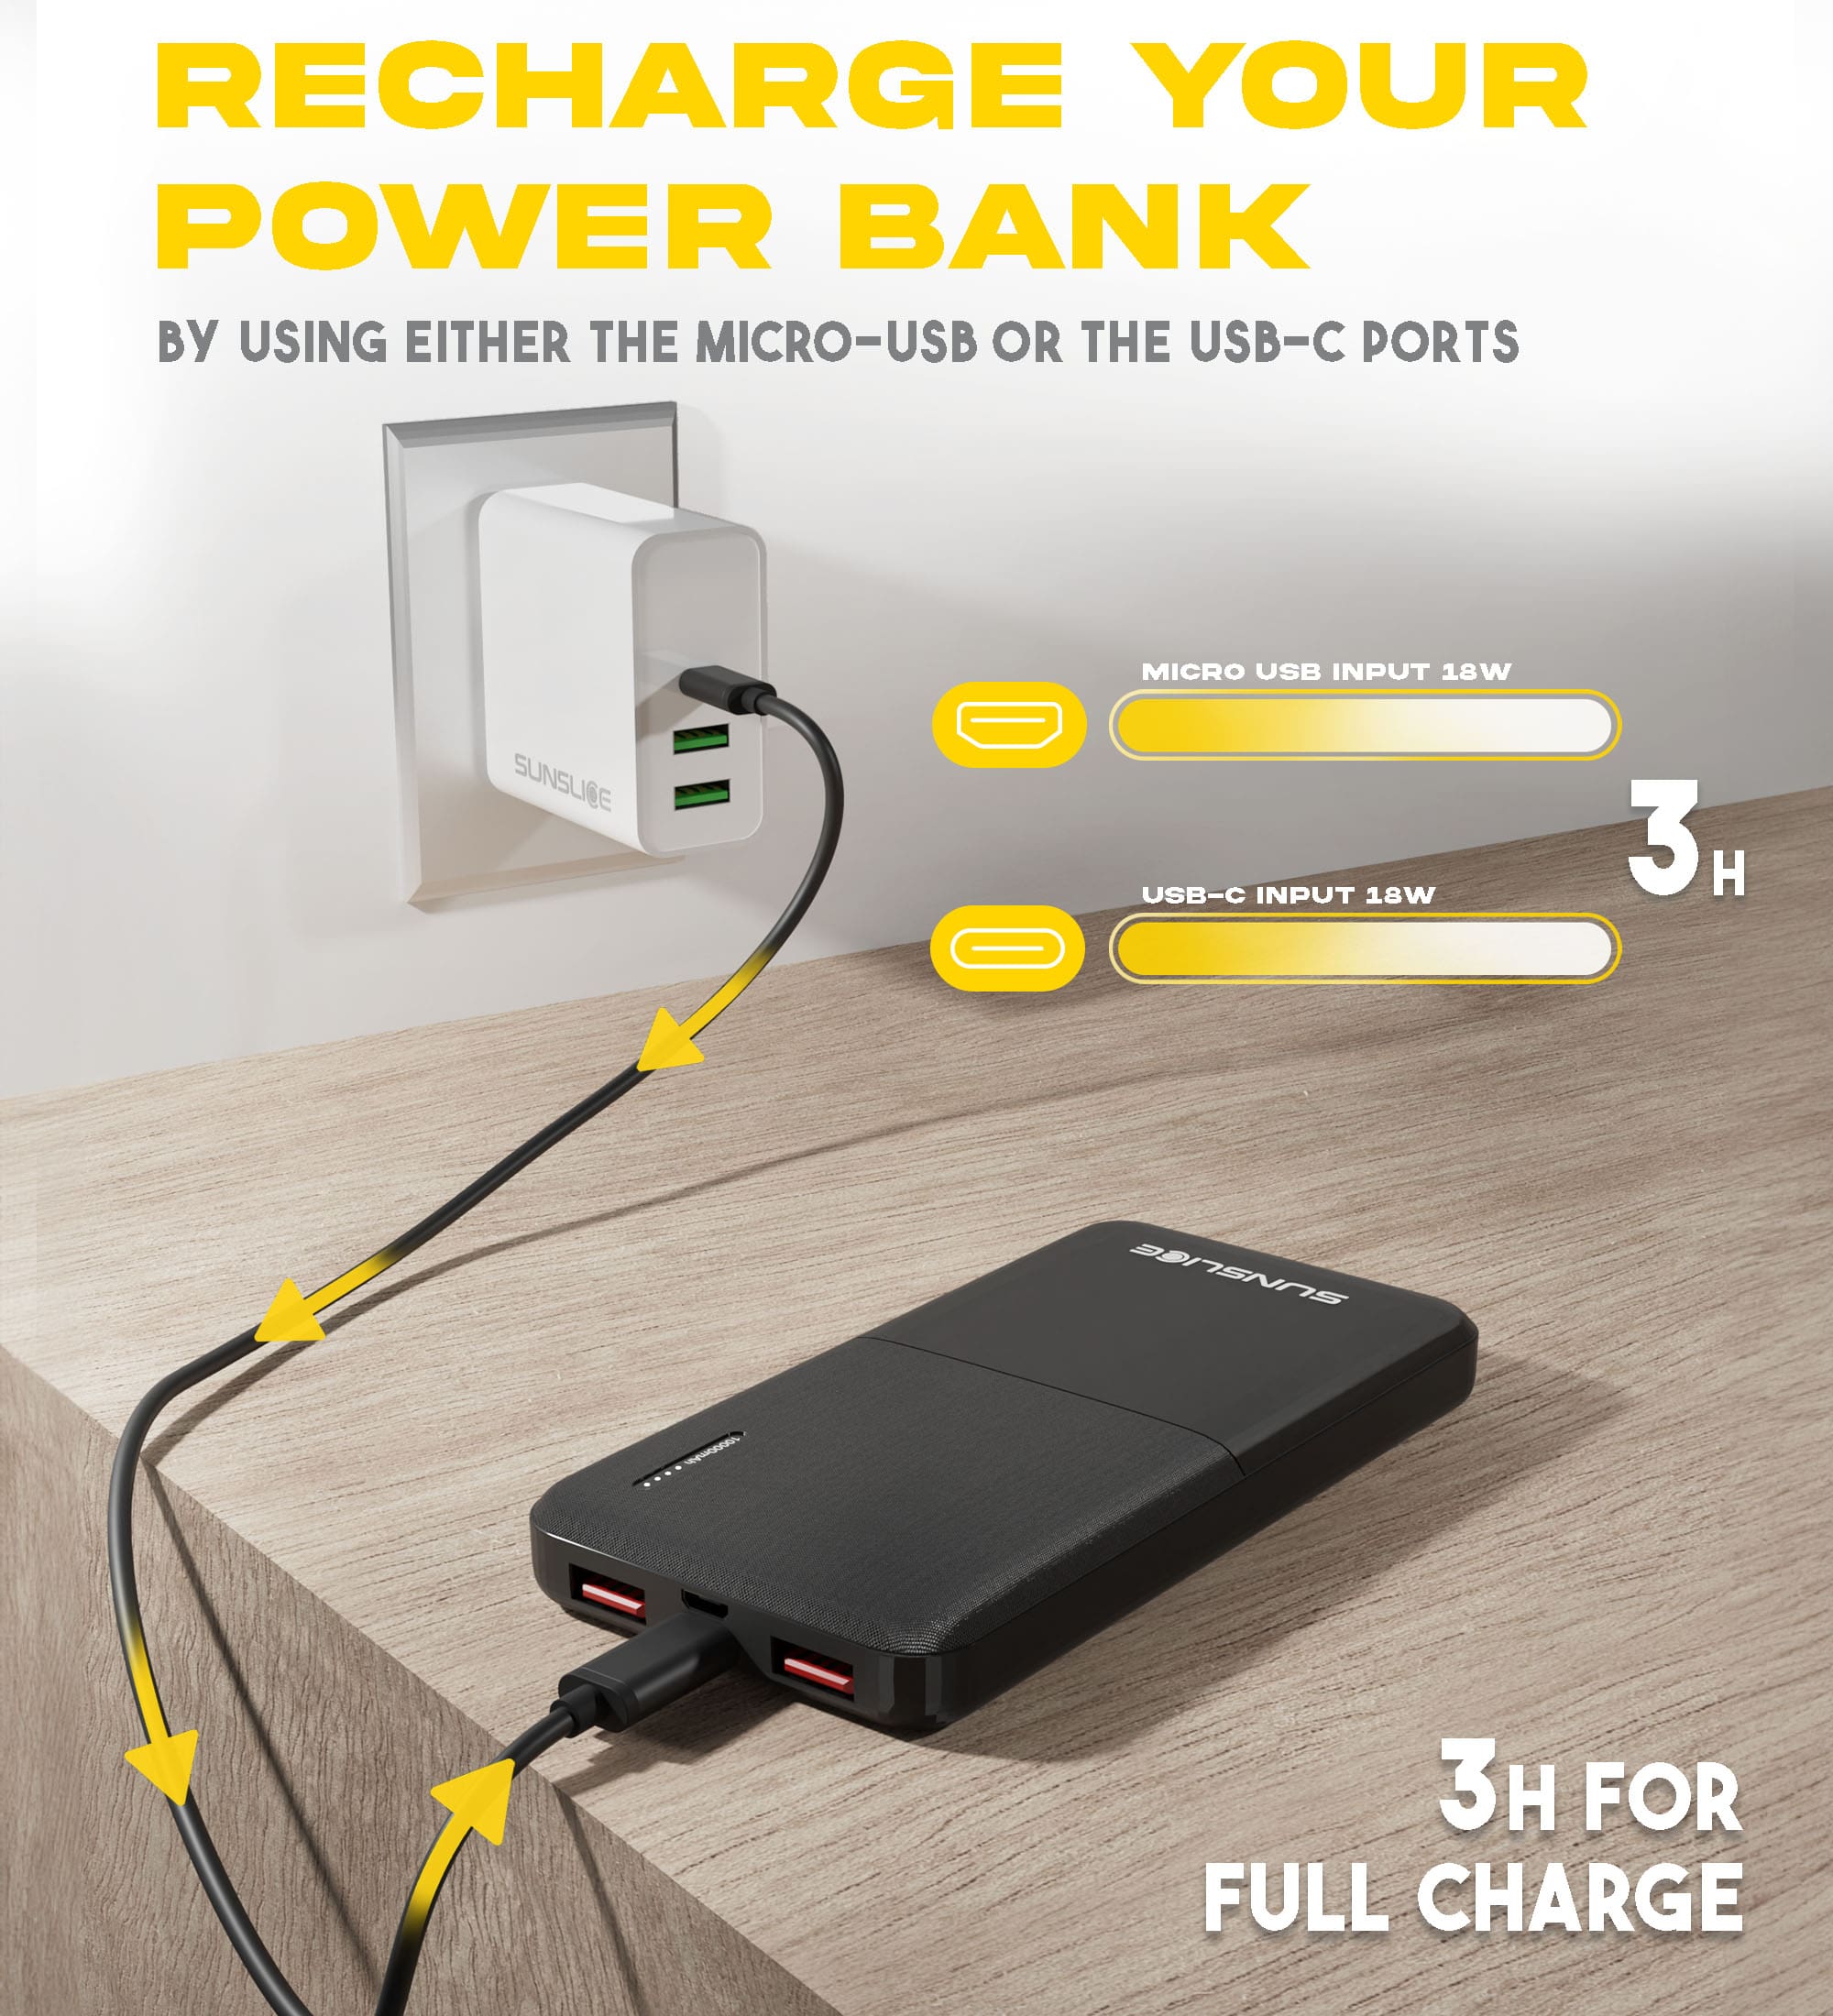 Recharge your power bank by using the micro usb or the usb-c ports : 3hours for full charge